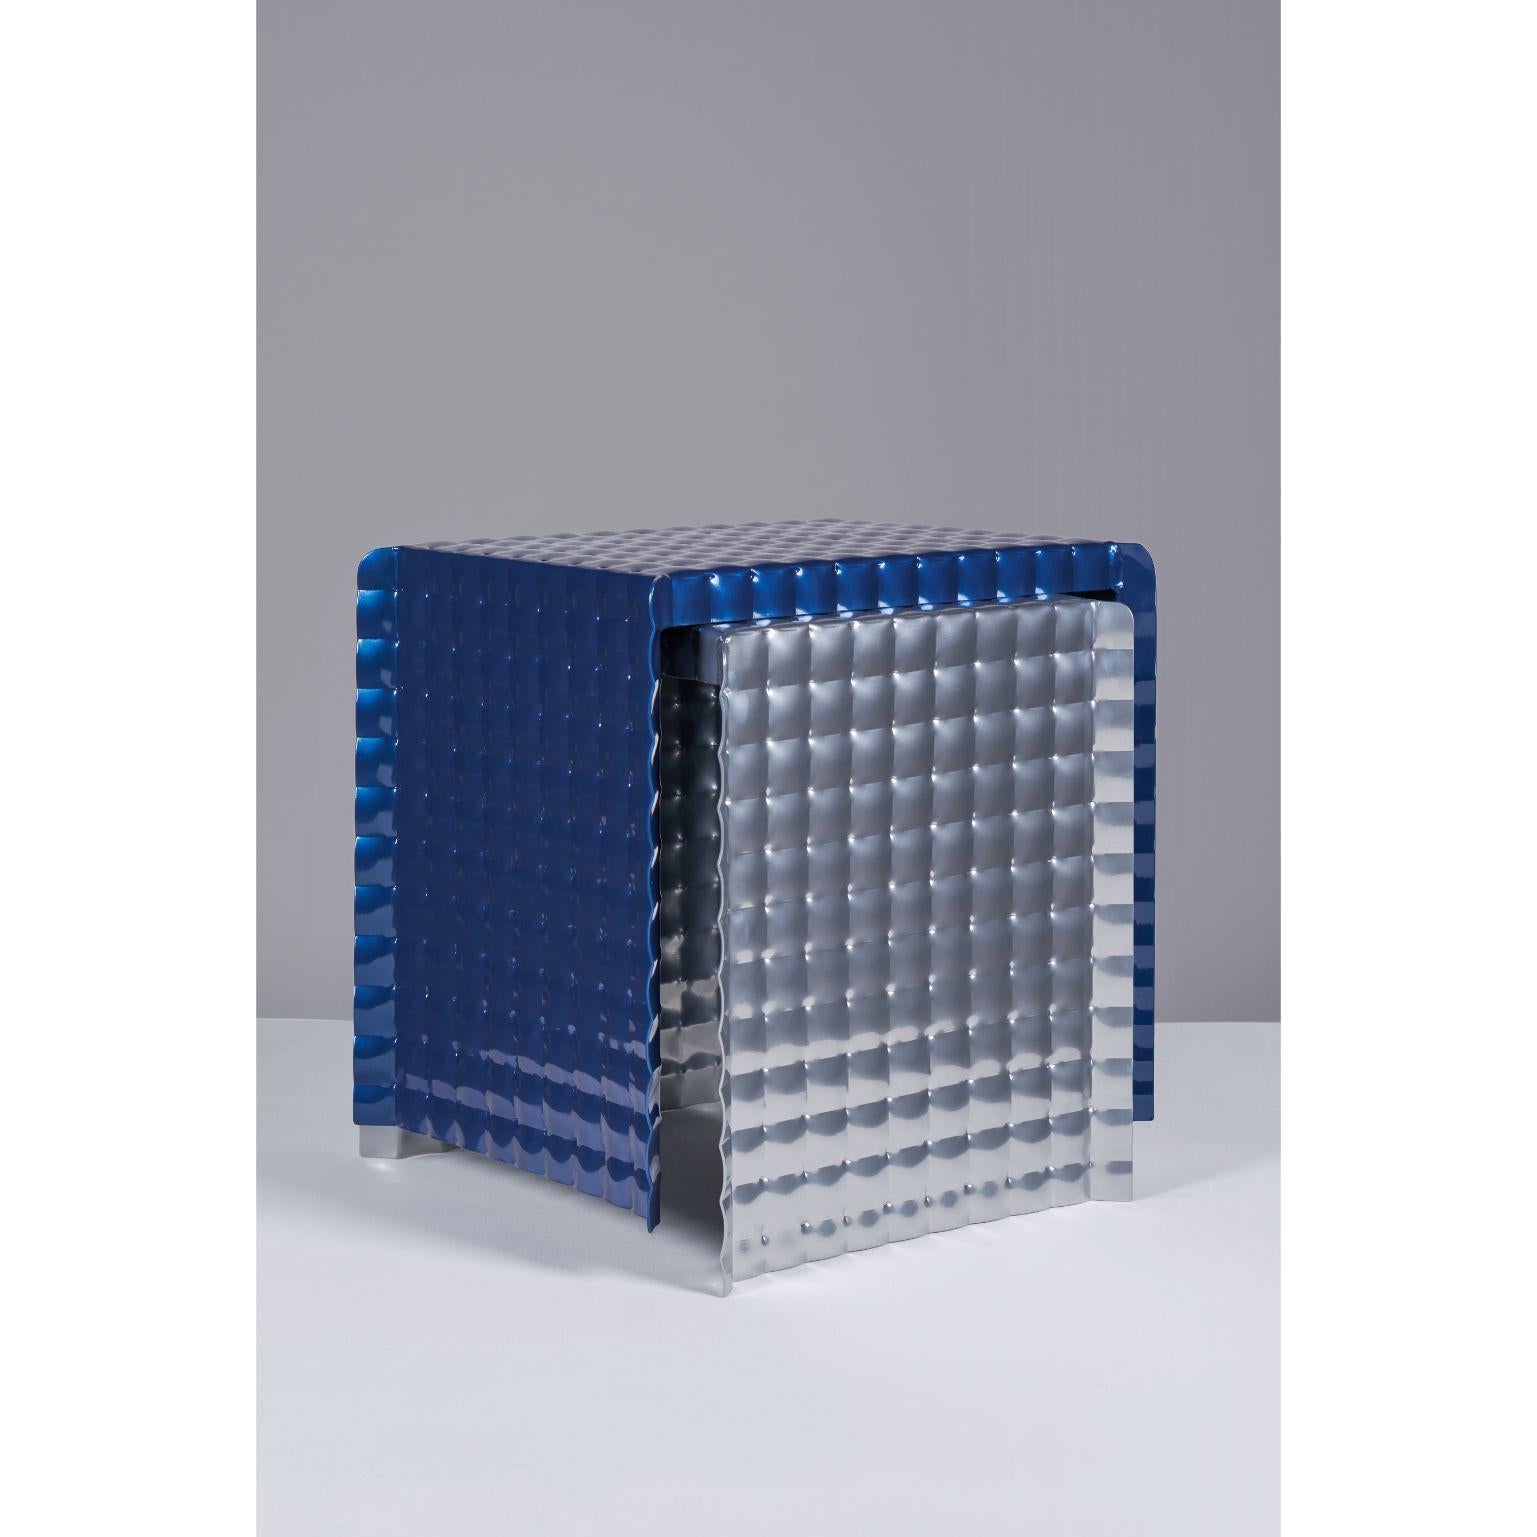 Night blue pressure stool by Tim Teven
Pressure Series (2018 - Ongoing)
Dimensions: 37 x 30 x 39 cm
Materials: Aluminium, powder coating

Also available: Silver/ chrome.

In the pressure series, Tim Teven uses material deformation under